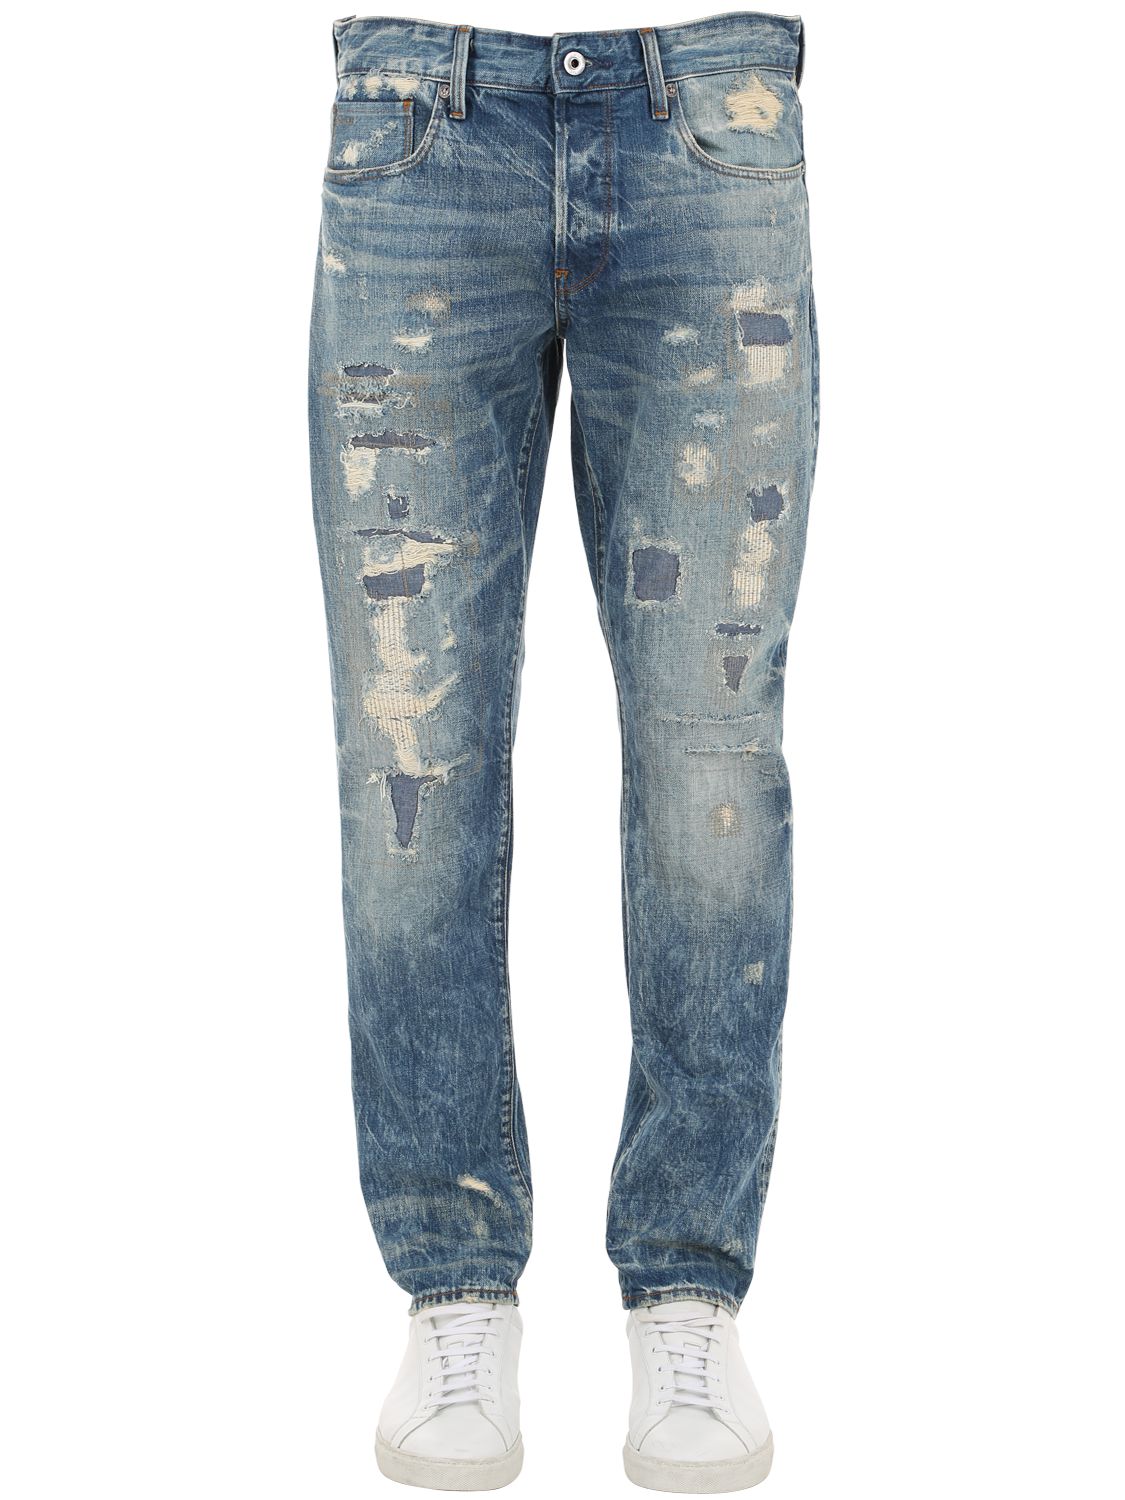 G-star 3301 Destroyed Tapered Denim Jeans In Blue Aged